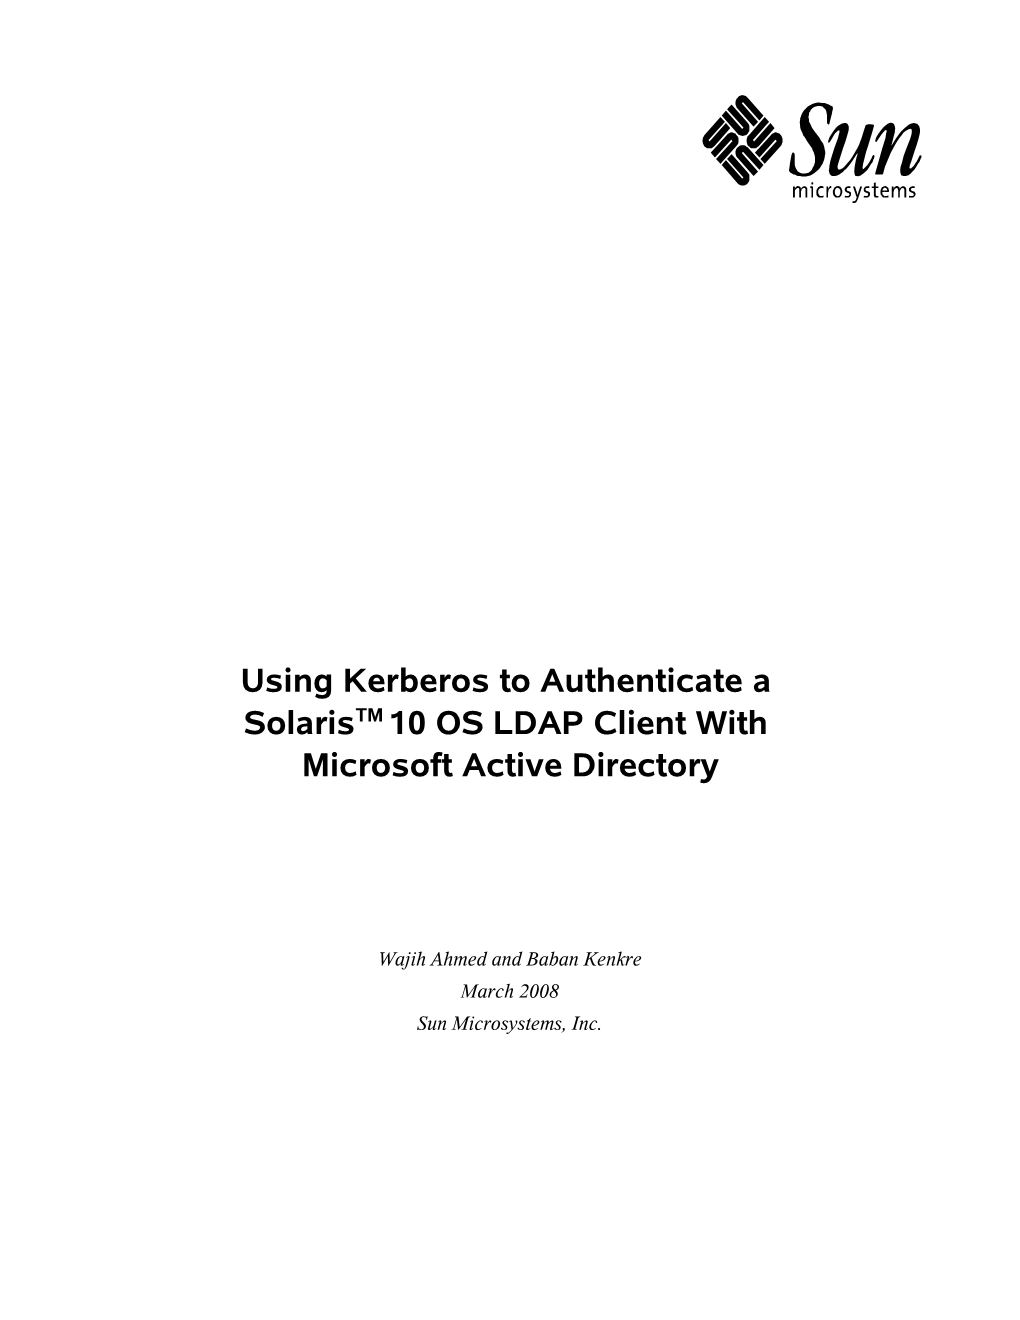 Using Kerberos to Authenticate a Solaris 10 OS LDAP Client with Microsoft Active Directory 2 Table of Contents Introduction